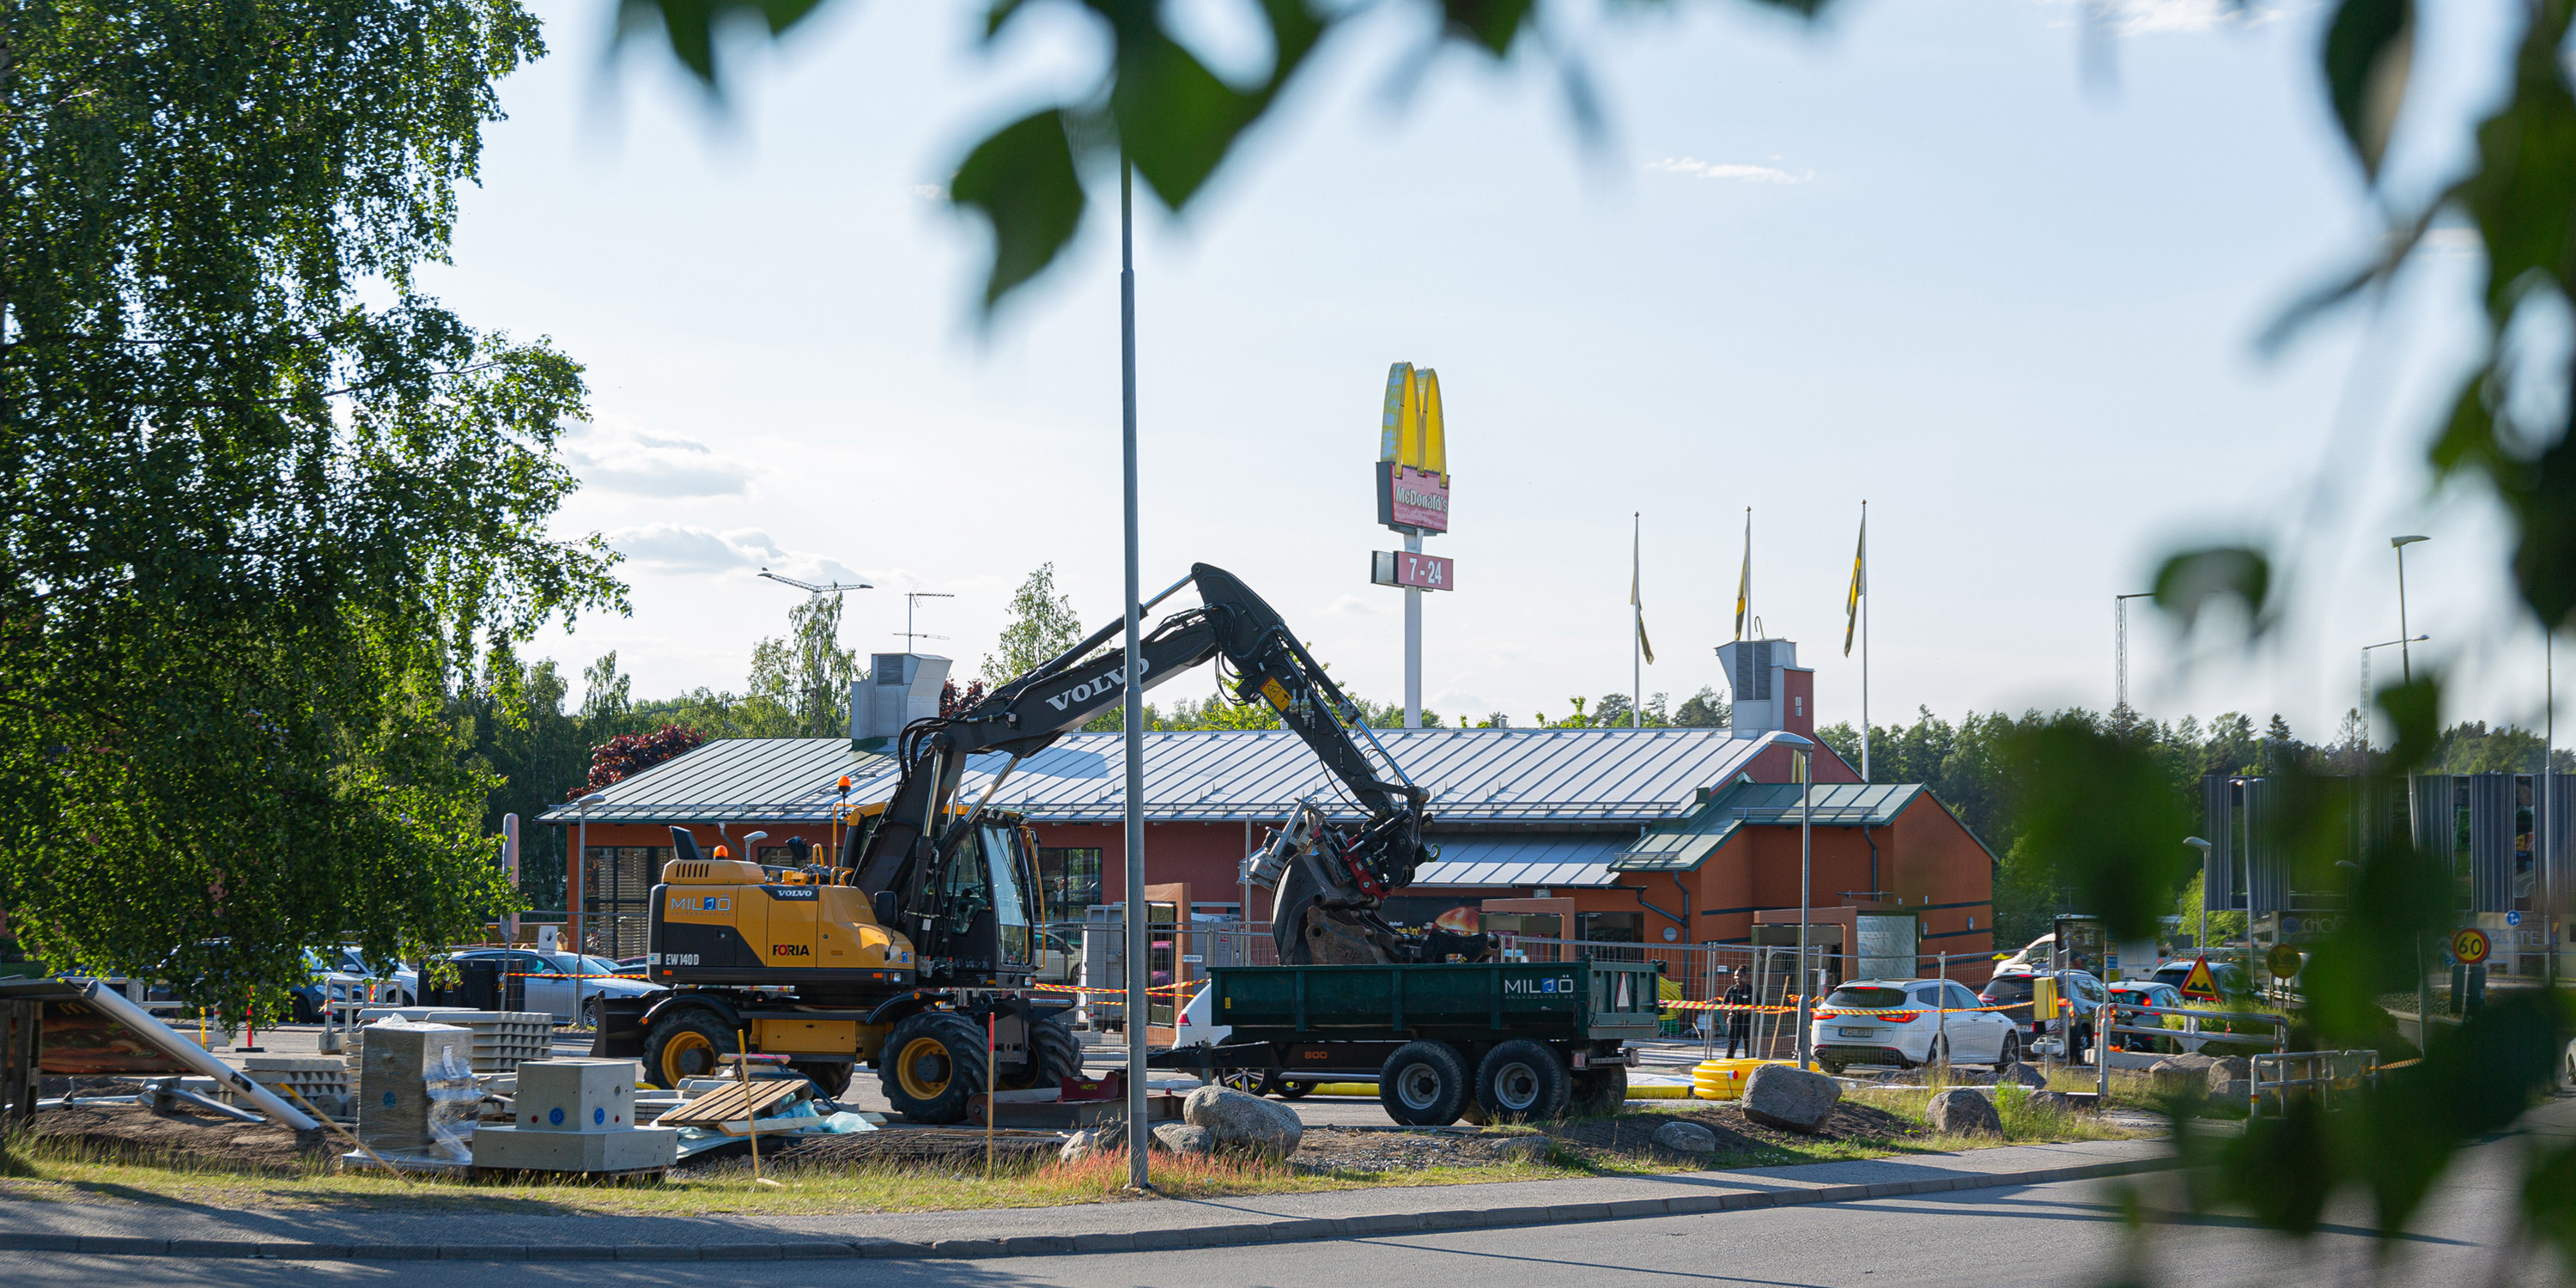 Retail construction project in process for McDonald's